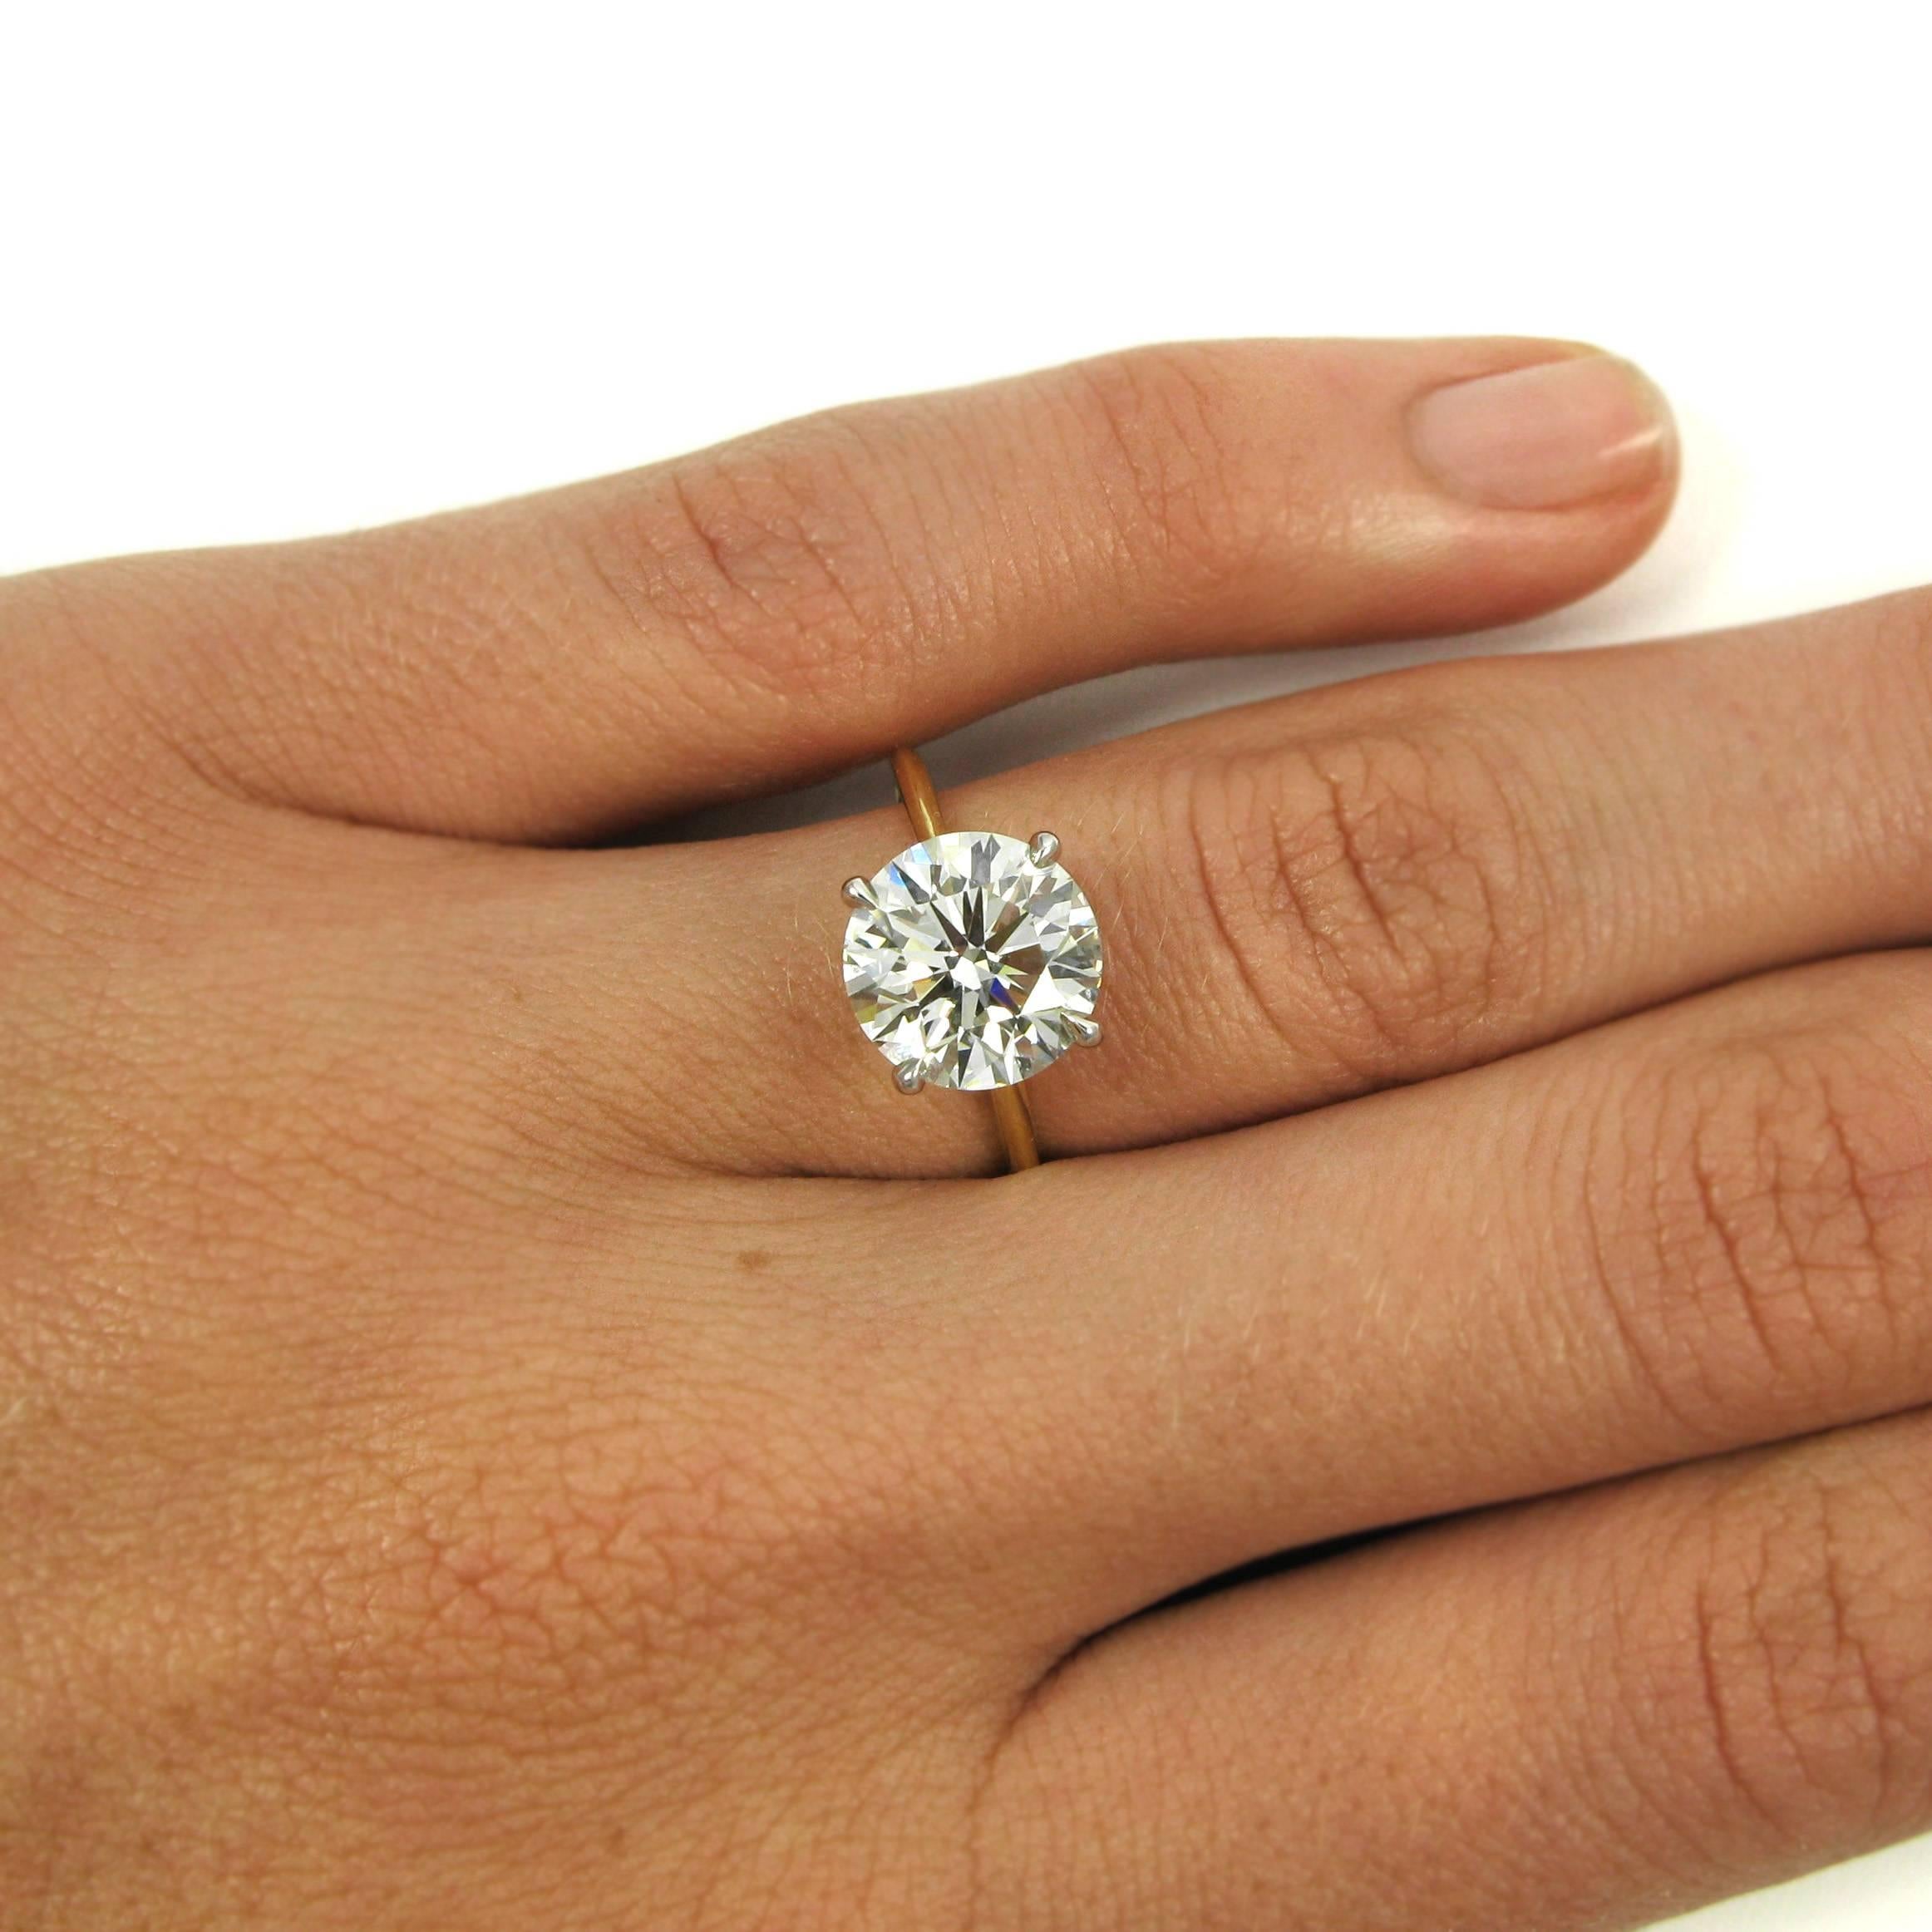 A delicate ring that makes a real statement! A 3.18 carat round brilliant-cut diamond is prong-set into a thin, 18 karat yellow and white gold solitaire mounting. Simple and elegant, with a whole lot of sparkle!

Purchase includes GIA Diamond